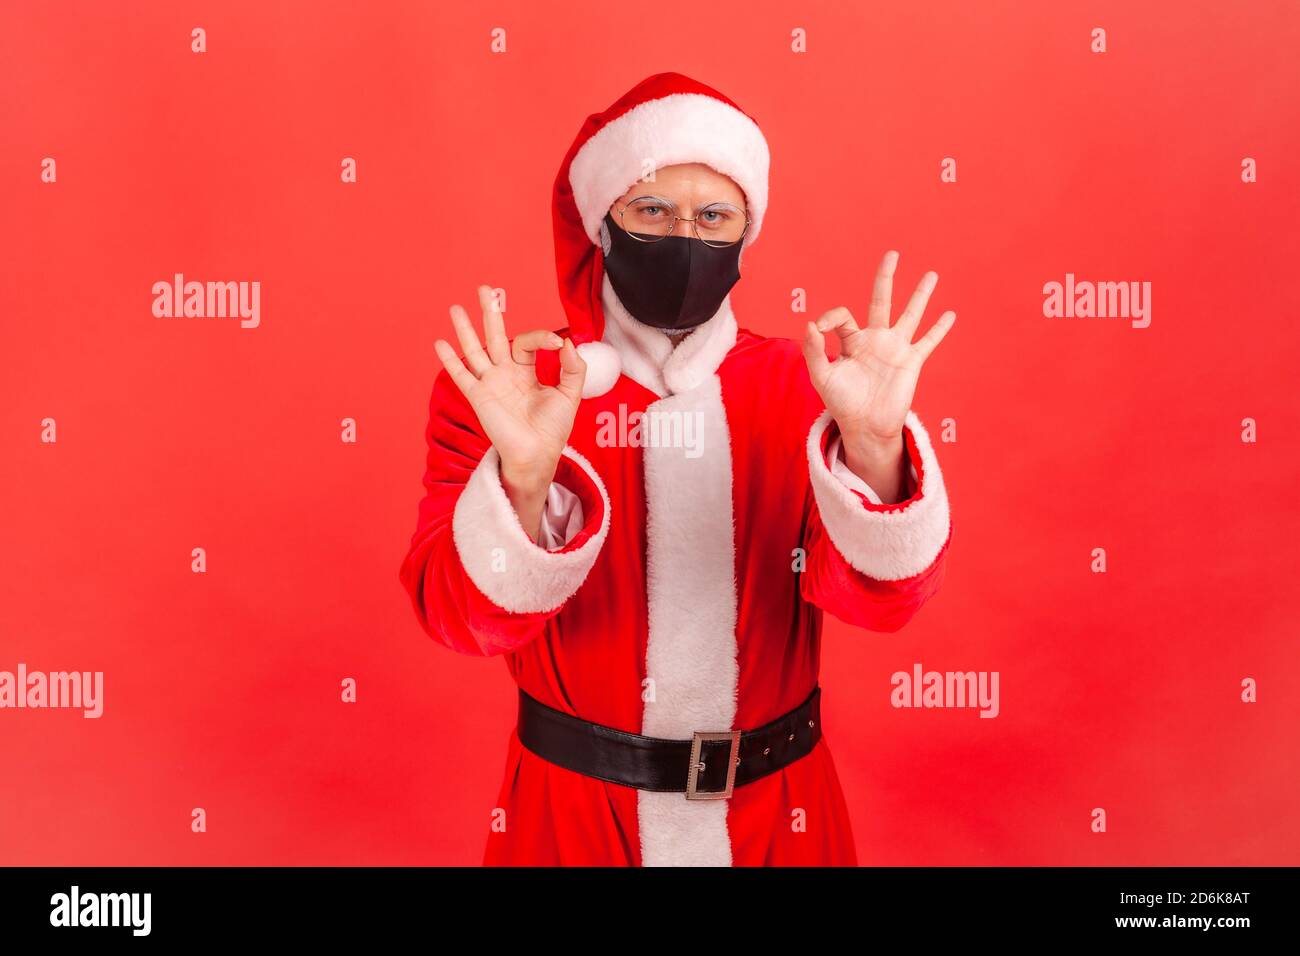 Positive optimistic man in santa claus costume with protective face mask showing ok gesture with fingers, cheering up on quarantine. Indoor studio sho Stock Photo